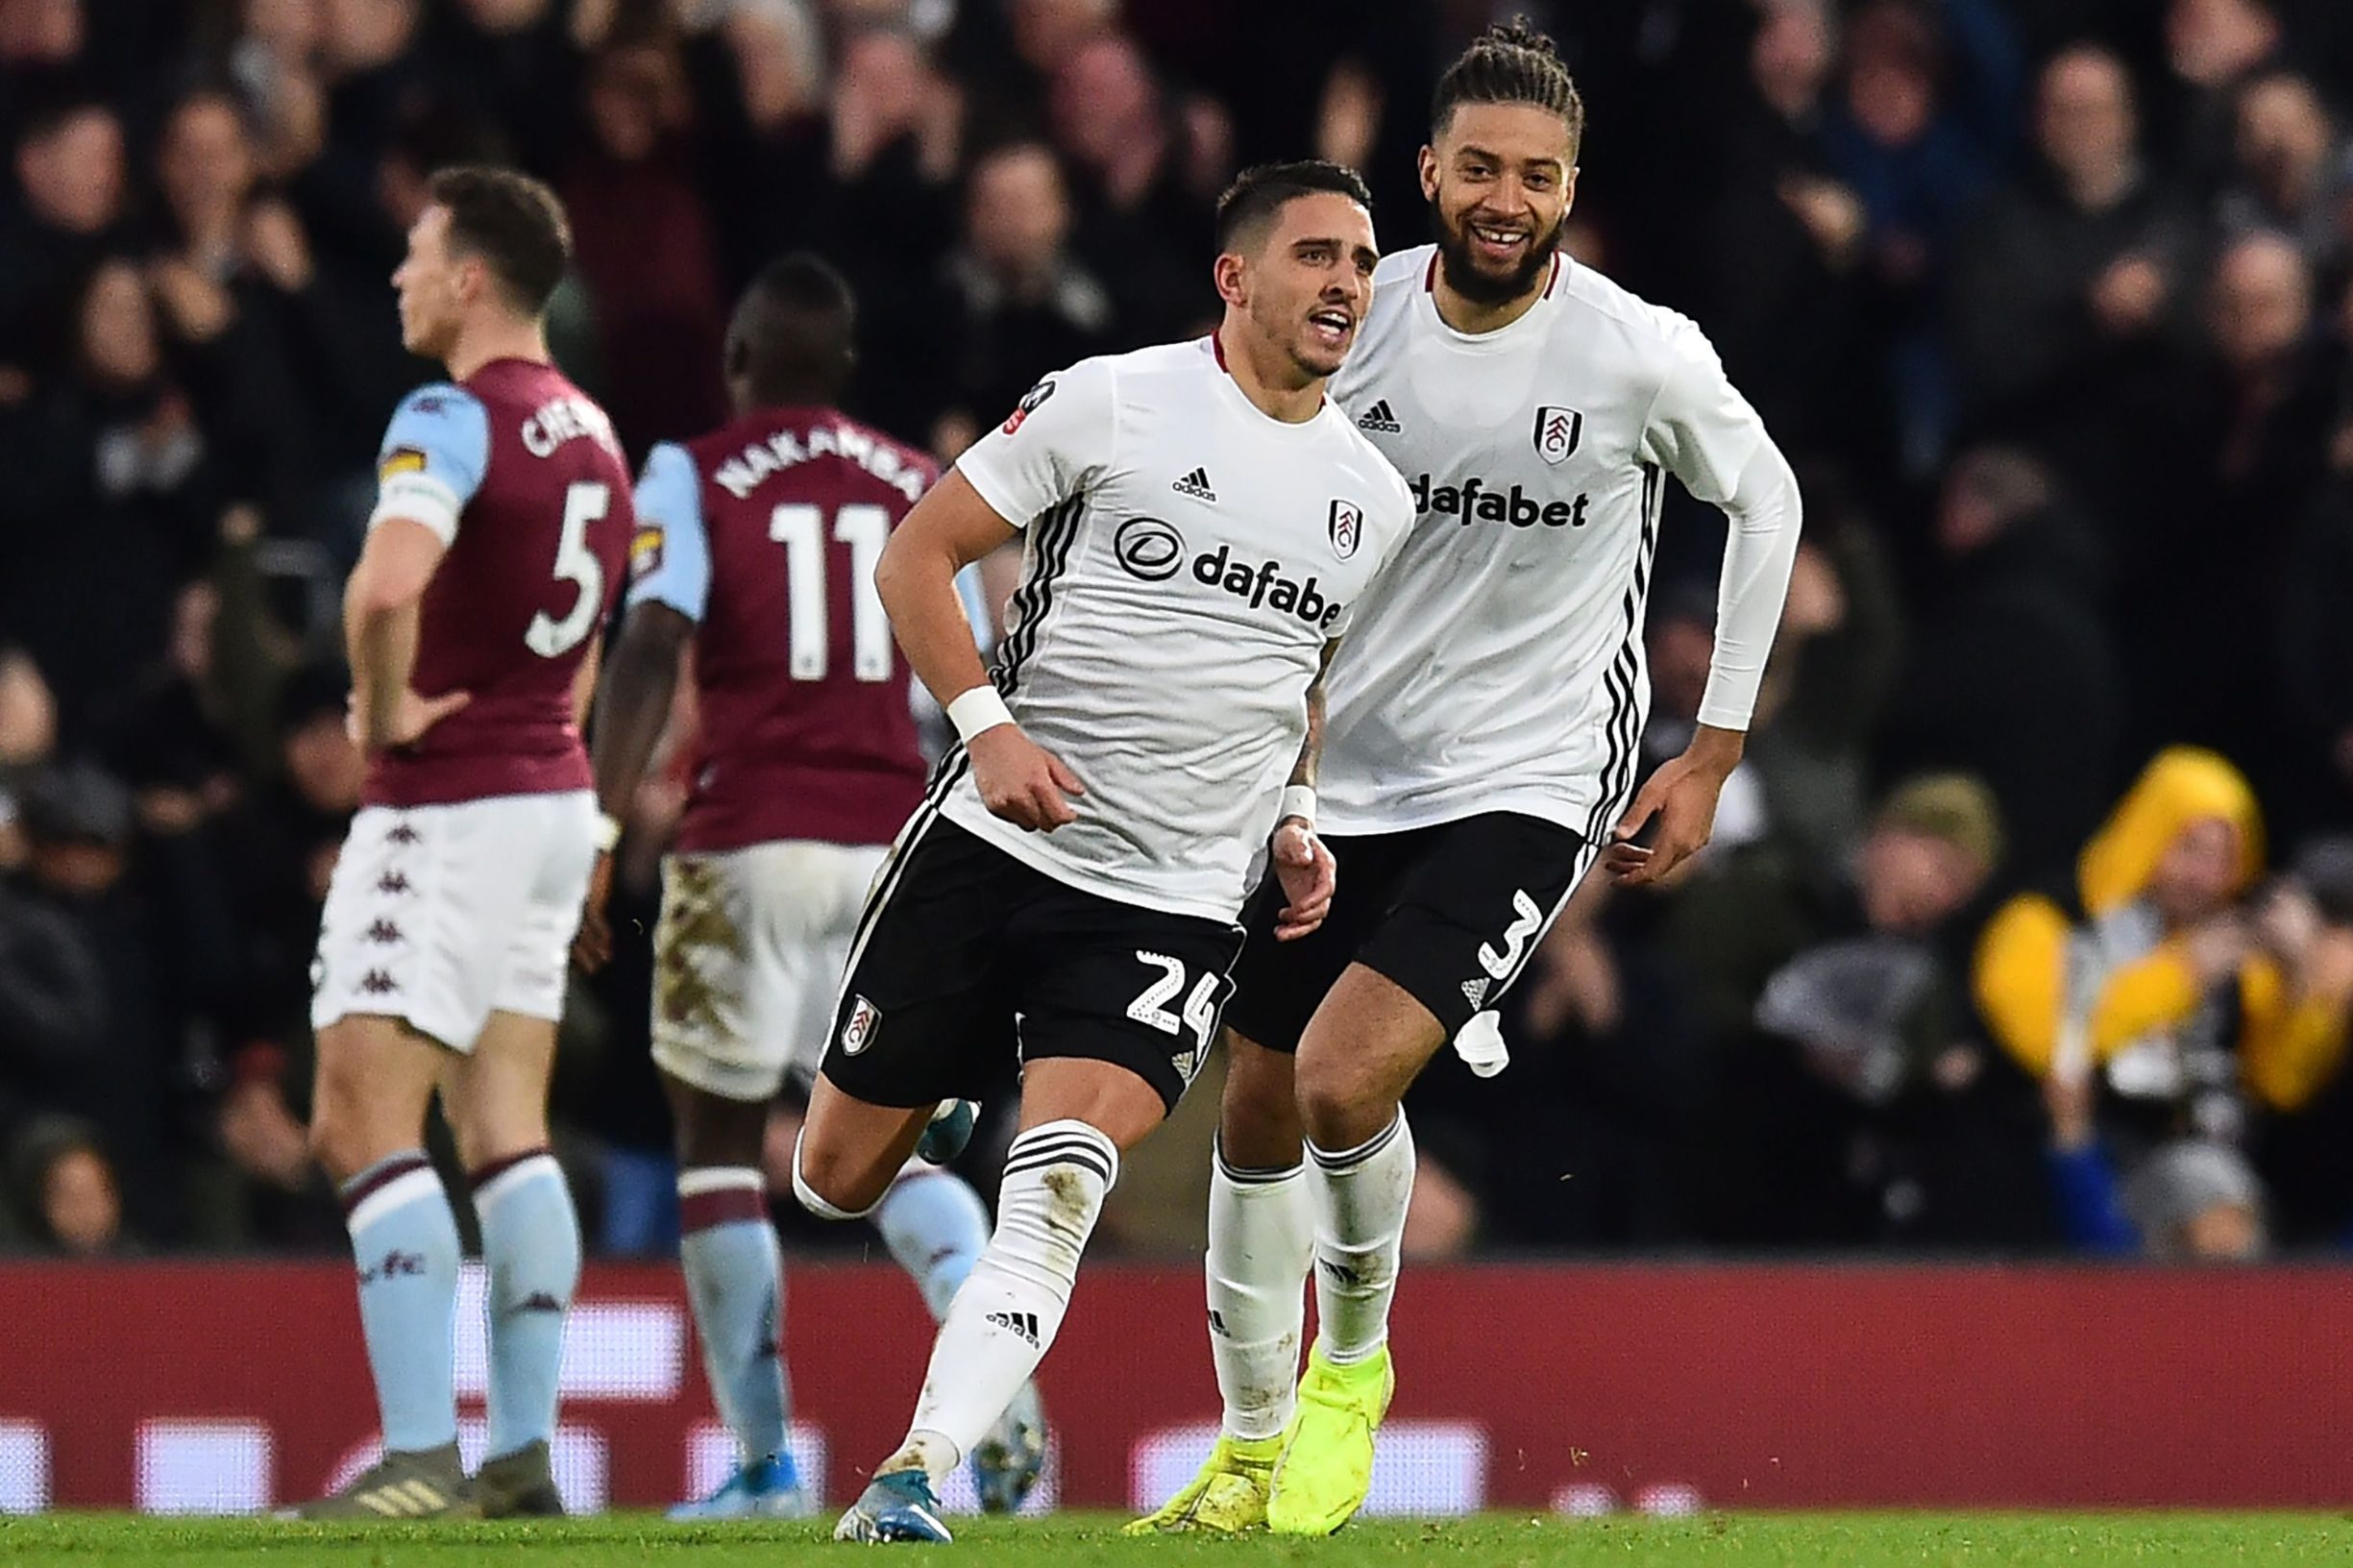 Fulham's French midfielder Anthony Knockaert celebrates scoring the opening goal of the English FA Cup third round football match between Fulham and Aston Villa at Craven Cottage in Fulham, west London on January 4, 2020. (Photo by Glyn KIRK / AFP) / RESTRICTED TO EDITORIAL USE. No use with unauthorized audio, video, data, fixture lists, club/league logos or 'live' services. Online in-match use limited to 120 images. An additional 40 images may be used in extra time. No video emulation. Social media in-match use limited to 120 images. An additional 40 images may be used in extra time. No use in betting publications, games or single club/league/player publications. / 